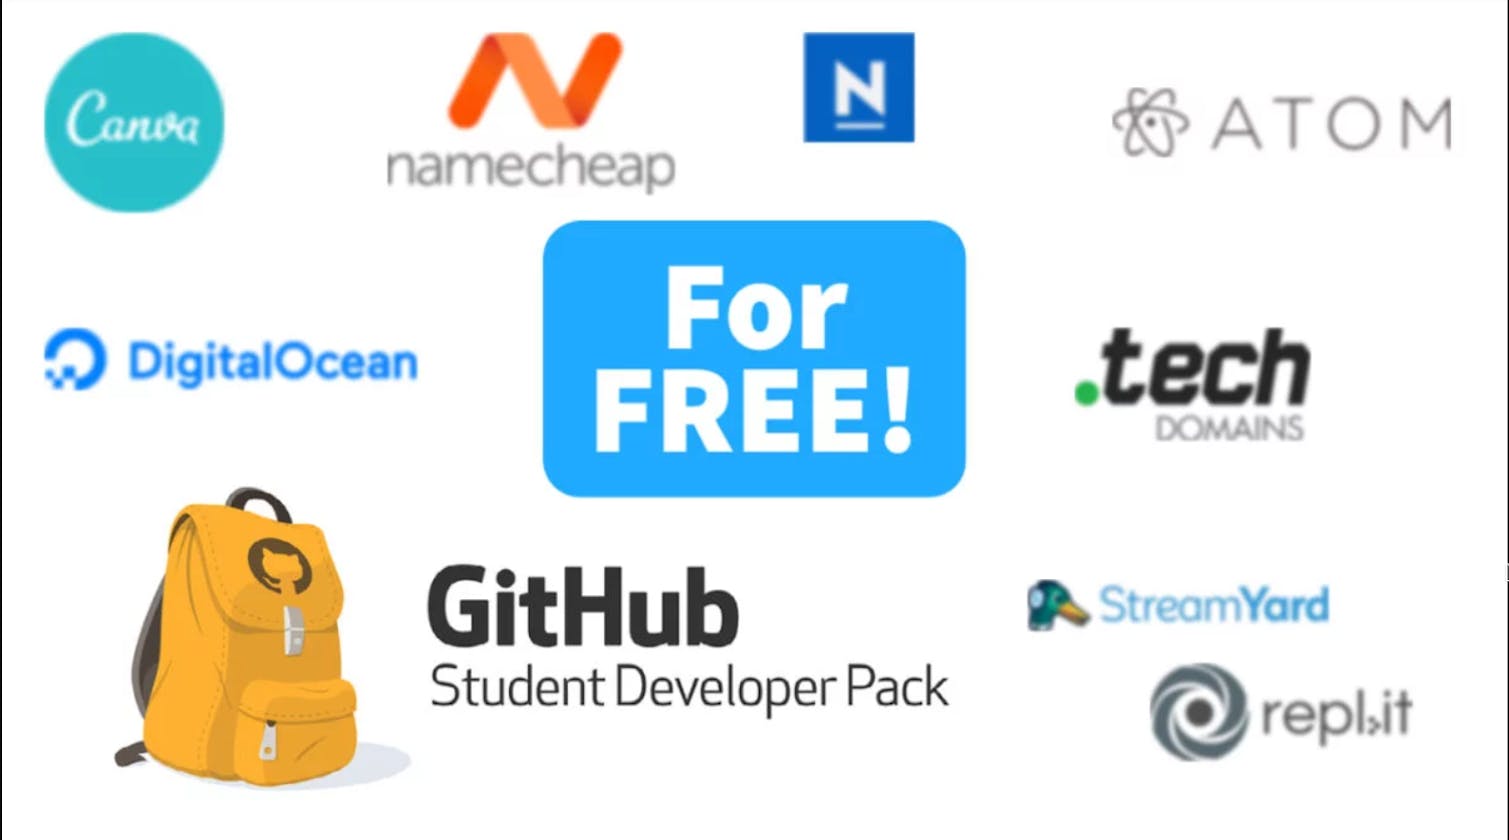 Get free resources worth $1000 using GitHub Student Developer Pack!!